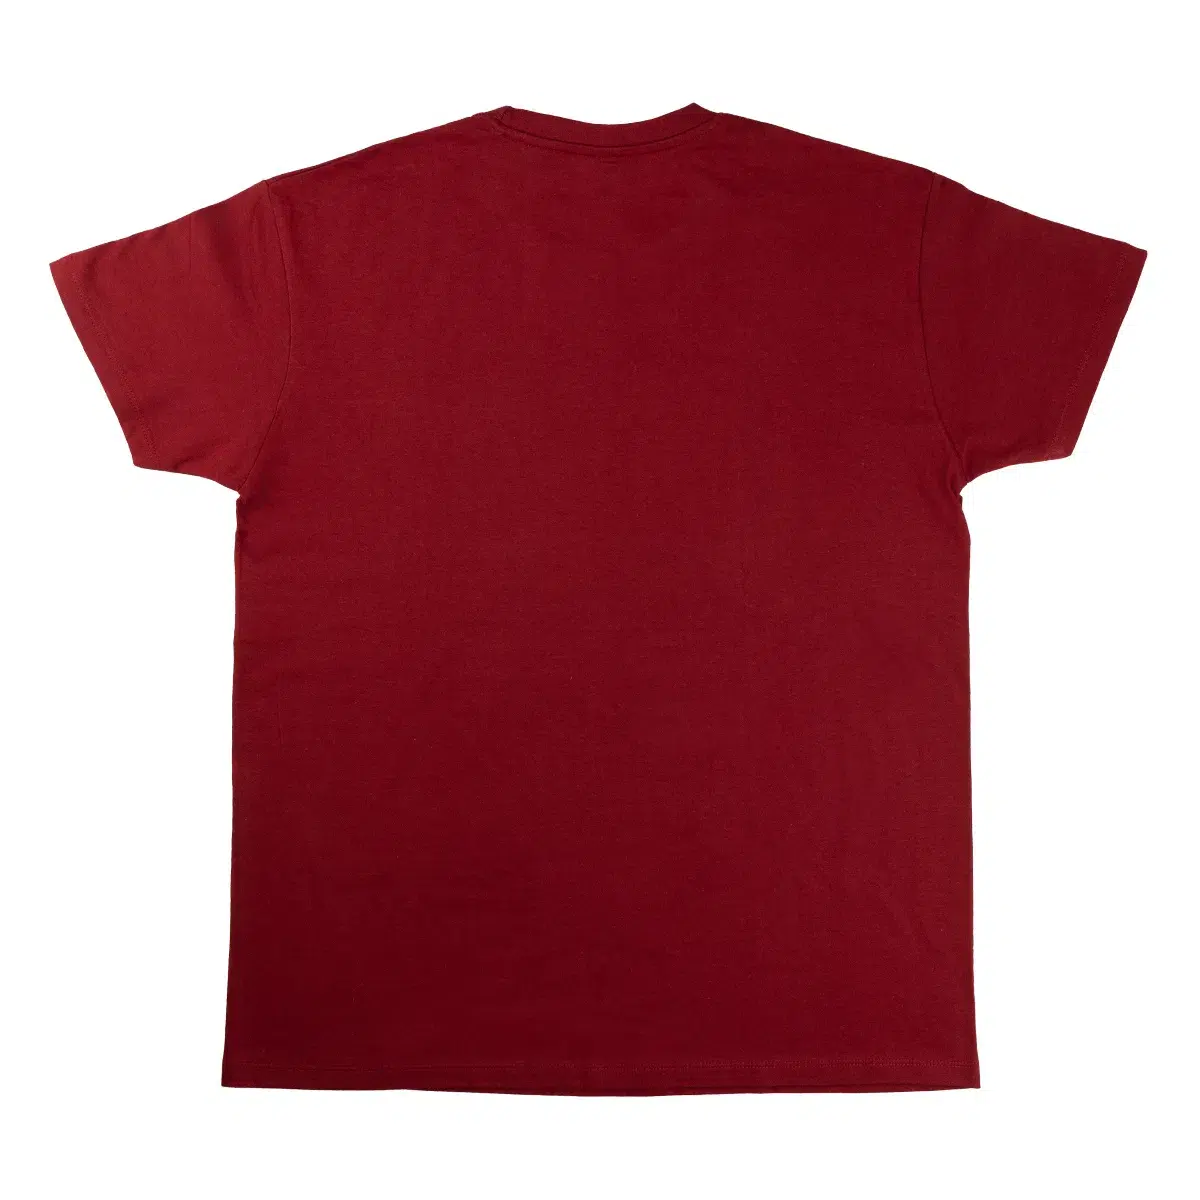 Dying Light 2 T-Shirt "Caldwell" Red S Image 4